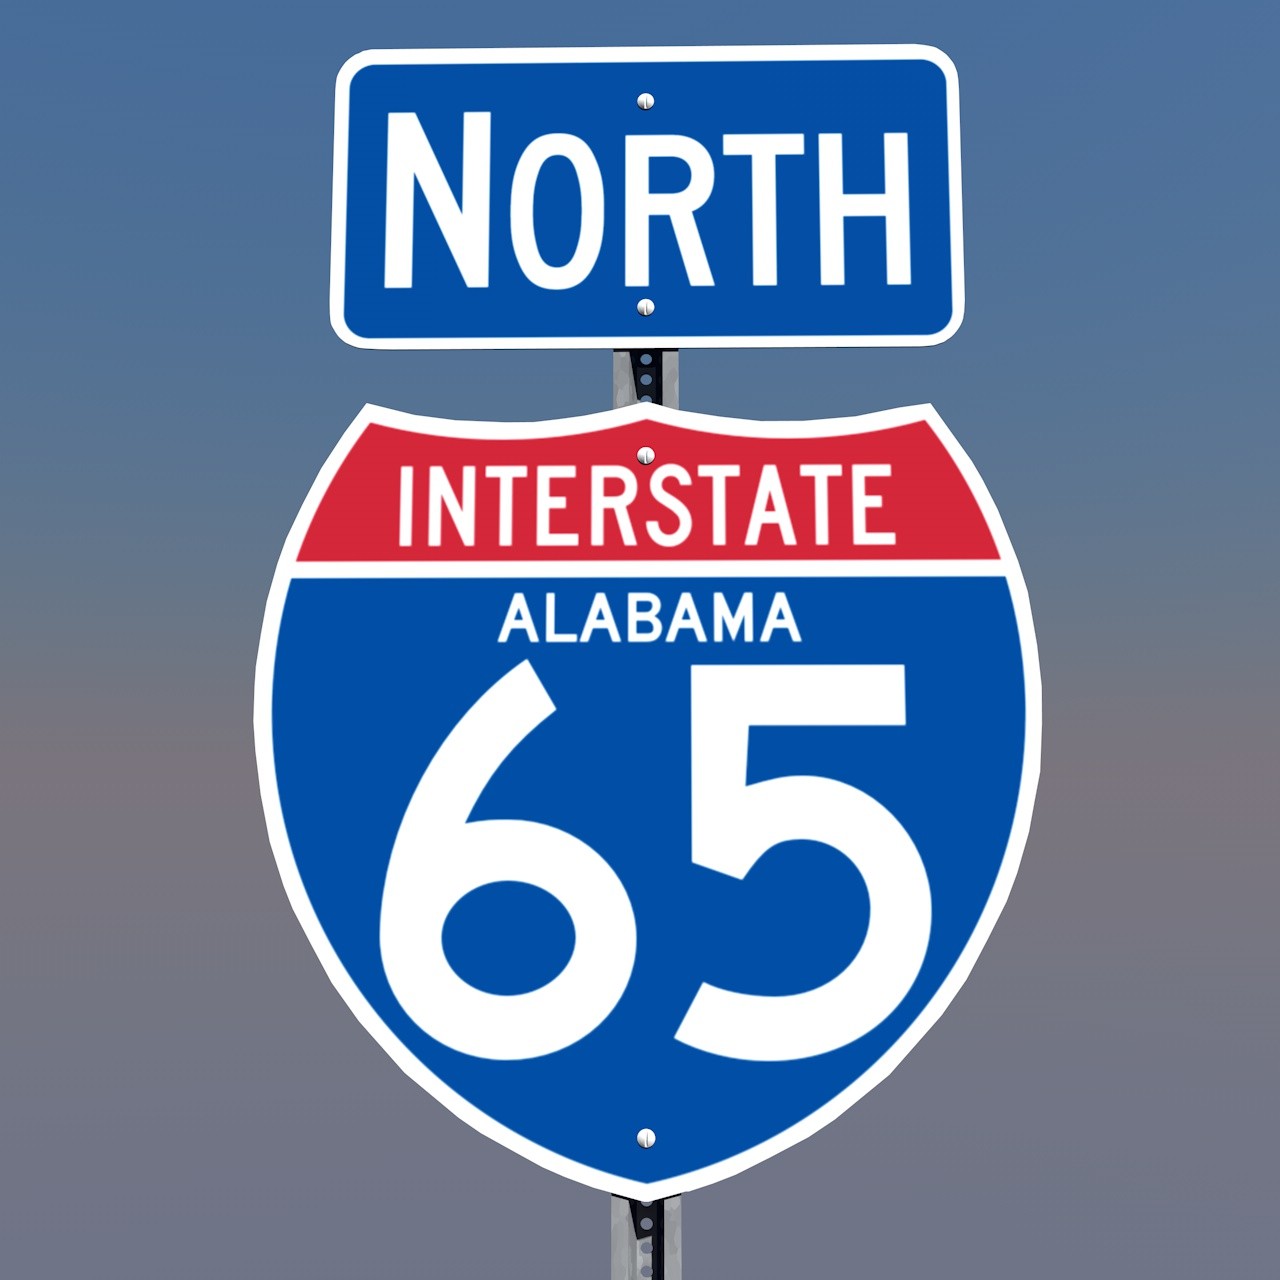 ALDOT plans to close ramp from I-59/20 Southbound to I-65 Northbound postponed